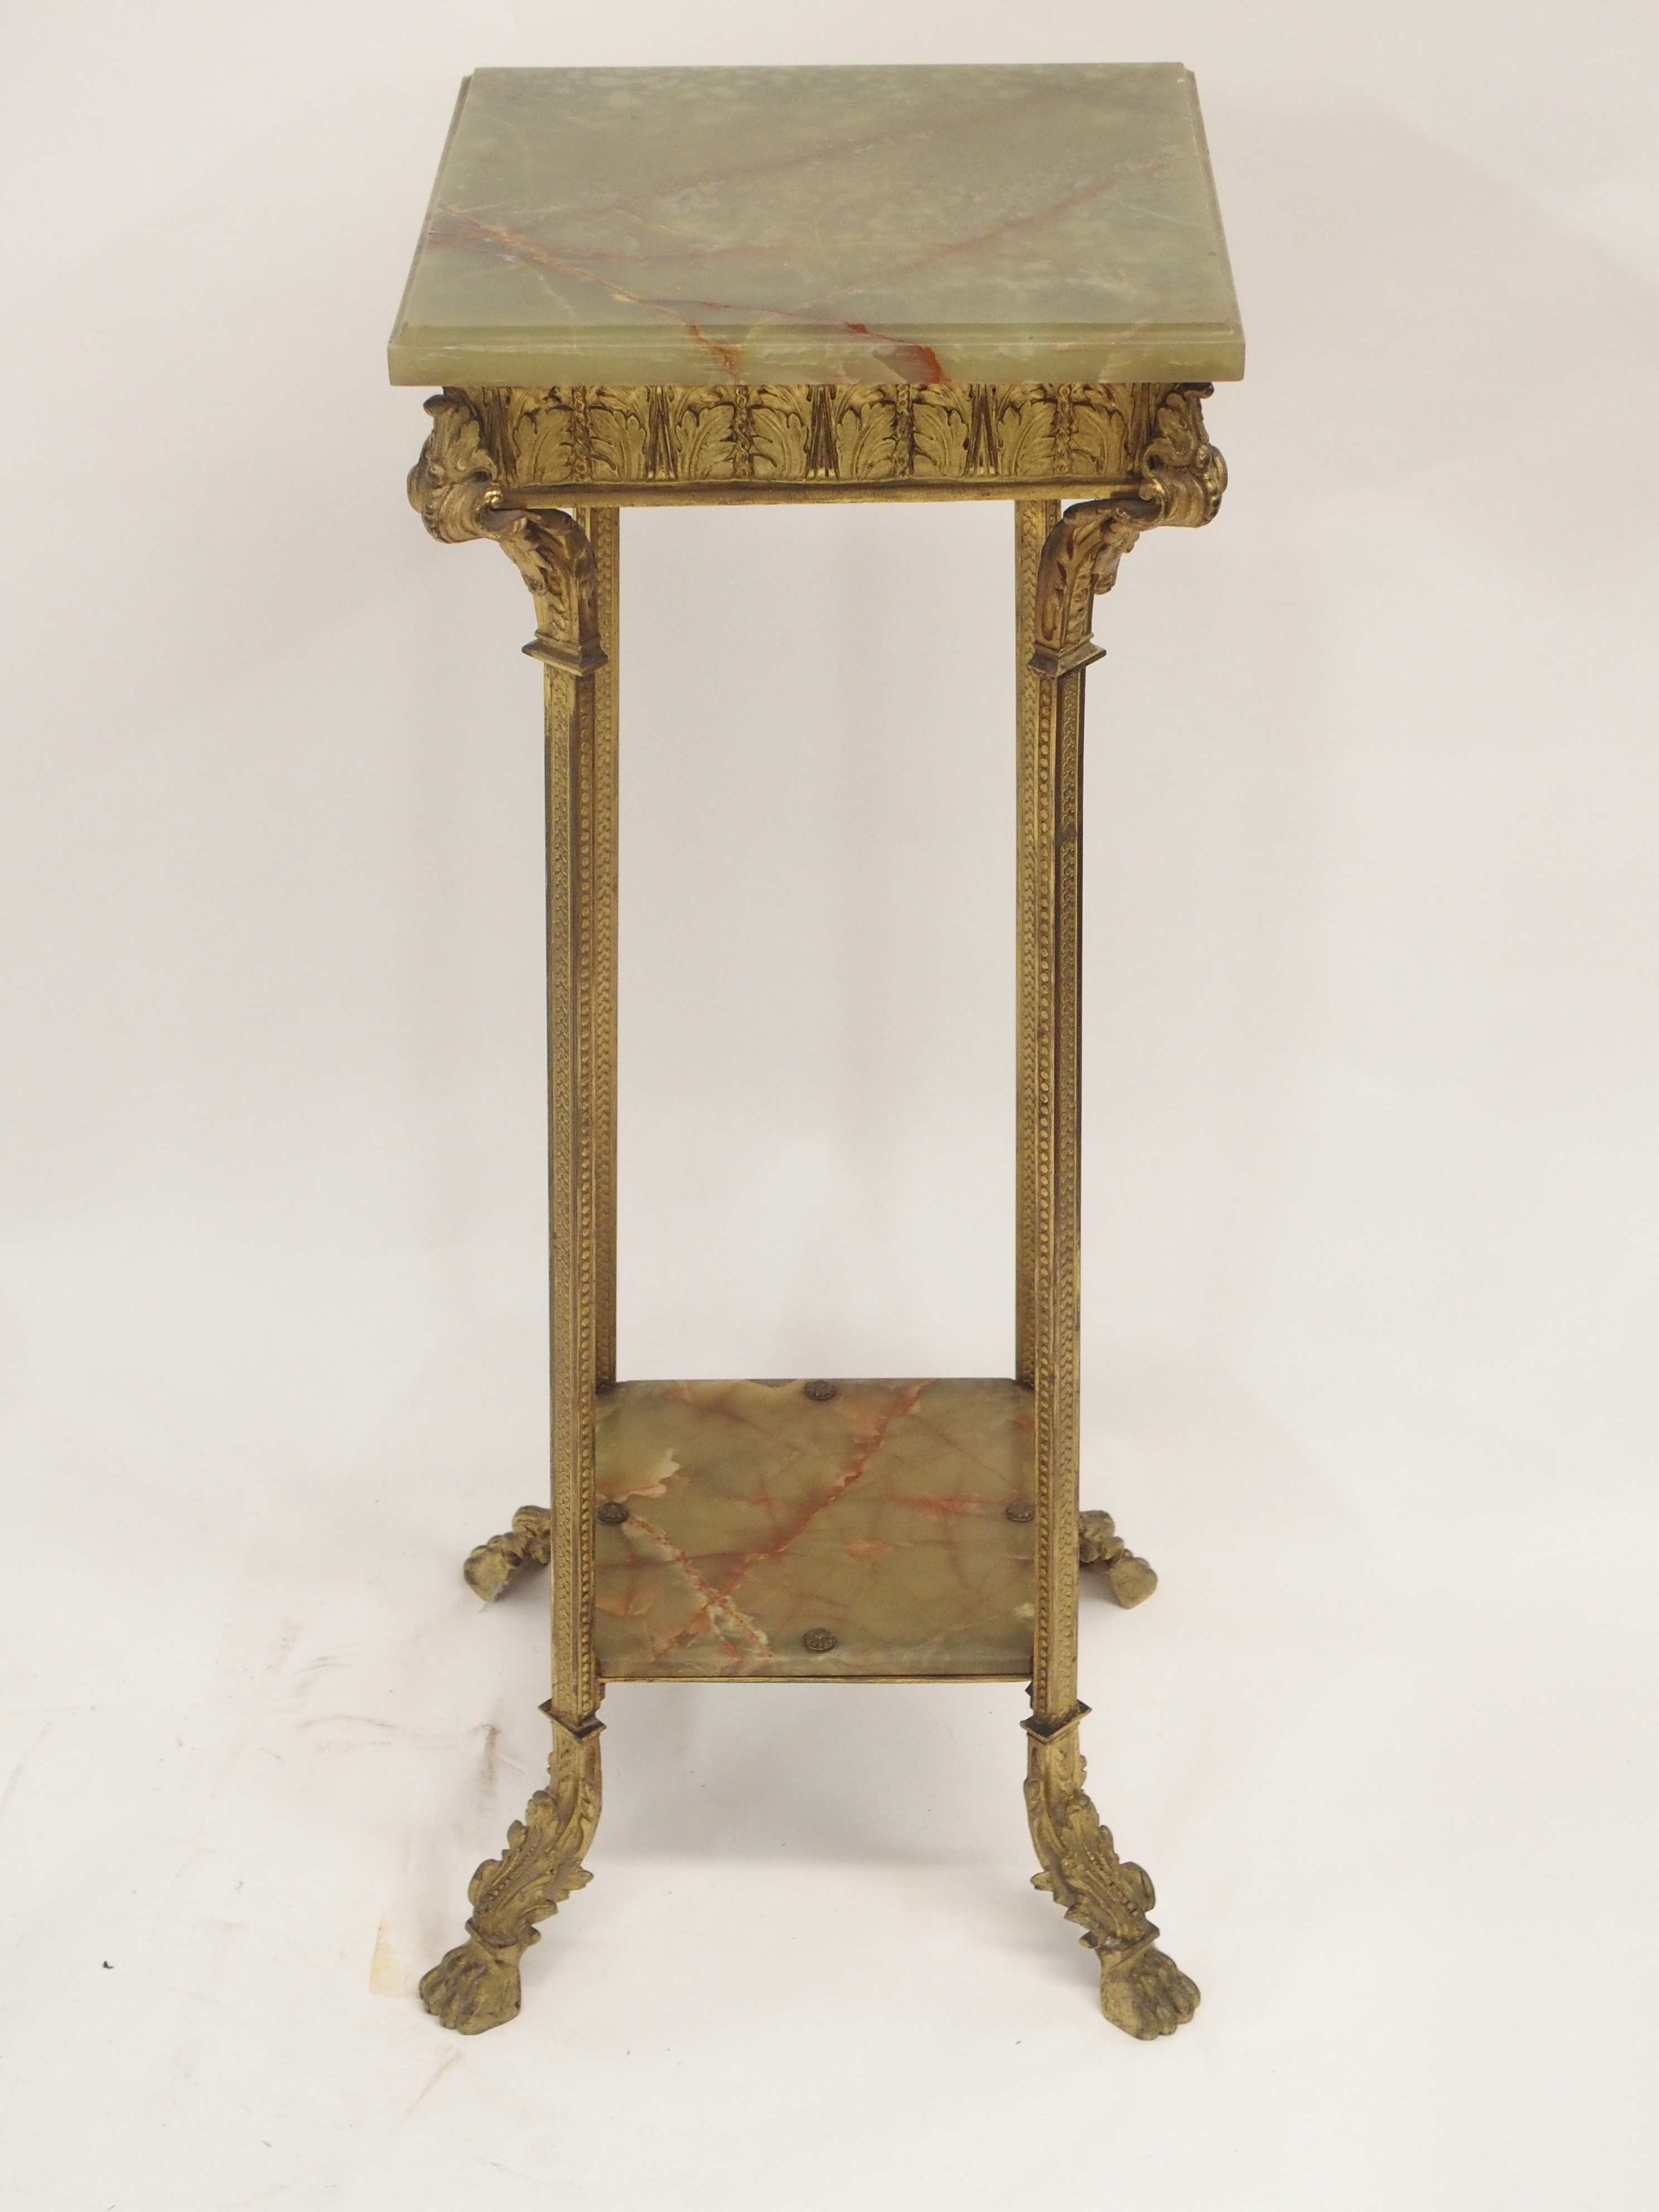 A GILT METAL AND GREEN ONYX PEDESTAL cast with acanthus leaf and on square legs joined by a shelf - Image 10 of 10